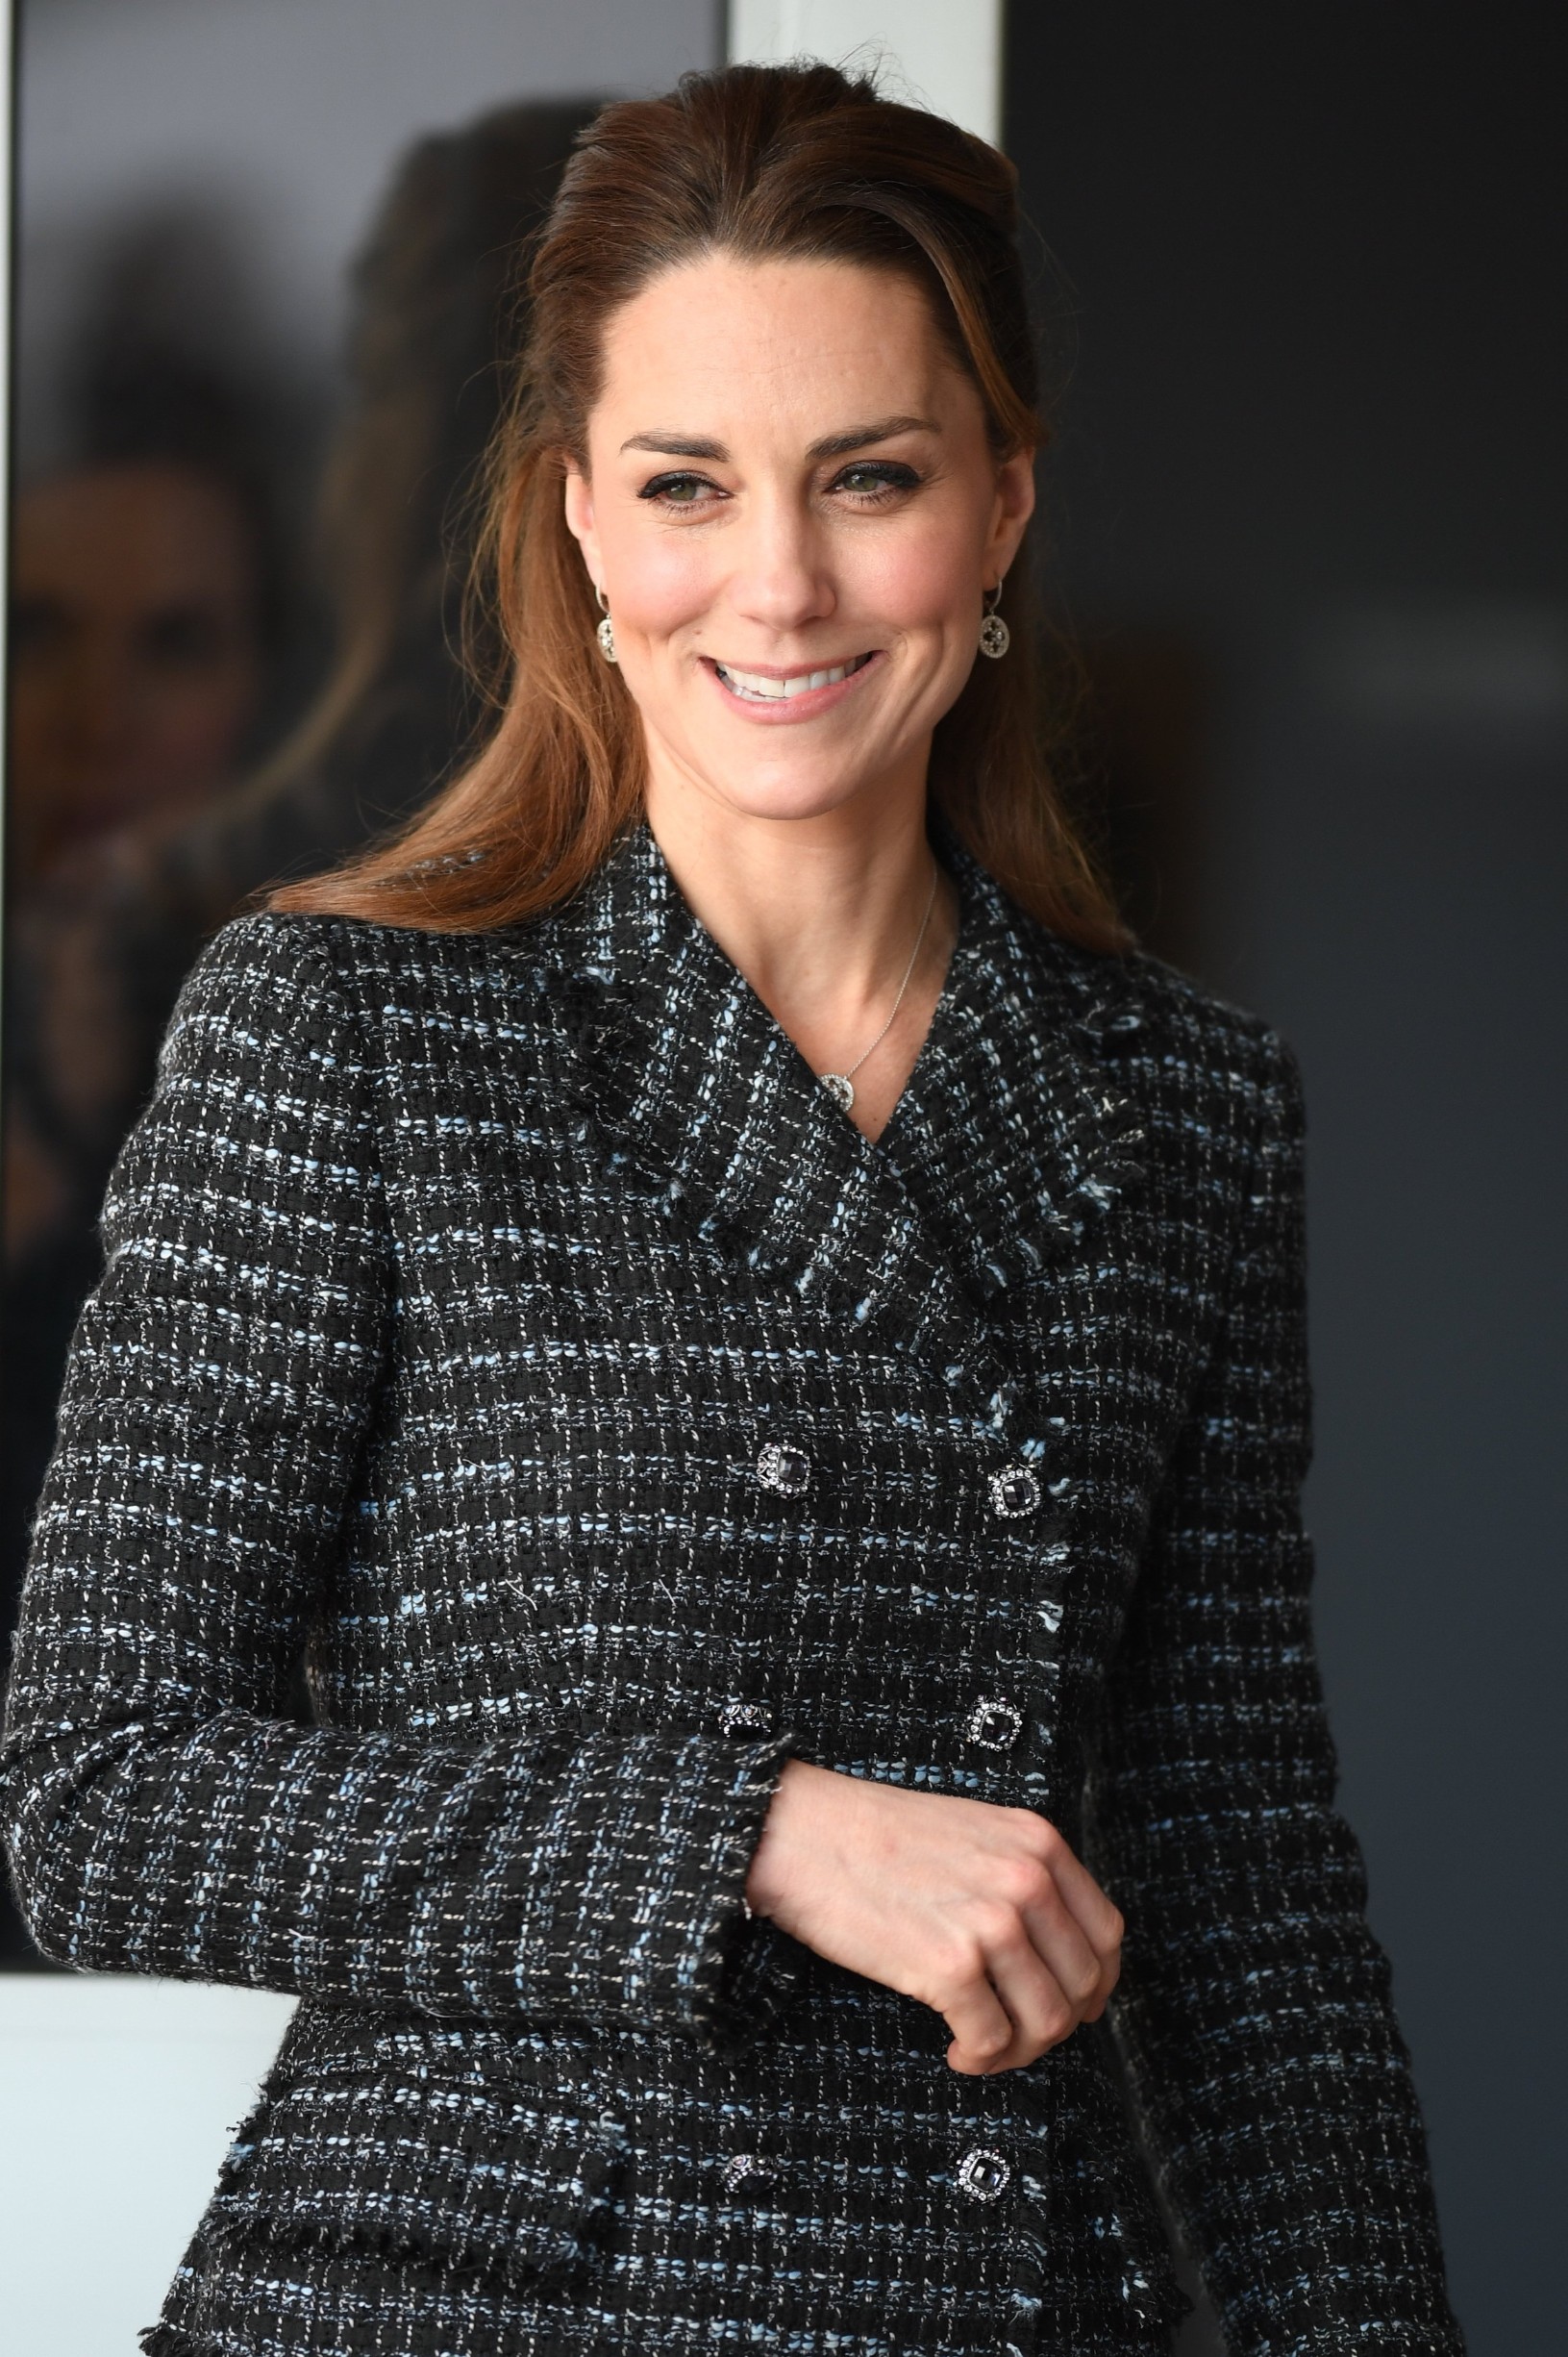 The Duchess of Cambridge visits a National Portrait gallery Workshop at Evelina London Children's Hospital, London, UK, on the 28th January 2020.
28 Jan 2020, Image: 495238400, License: Rights-managed, Restrictions: NO United Kingdom, Model Release: no, Credit line: James Whatling / MEGA / The Mega Agency / Profimedia